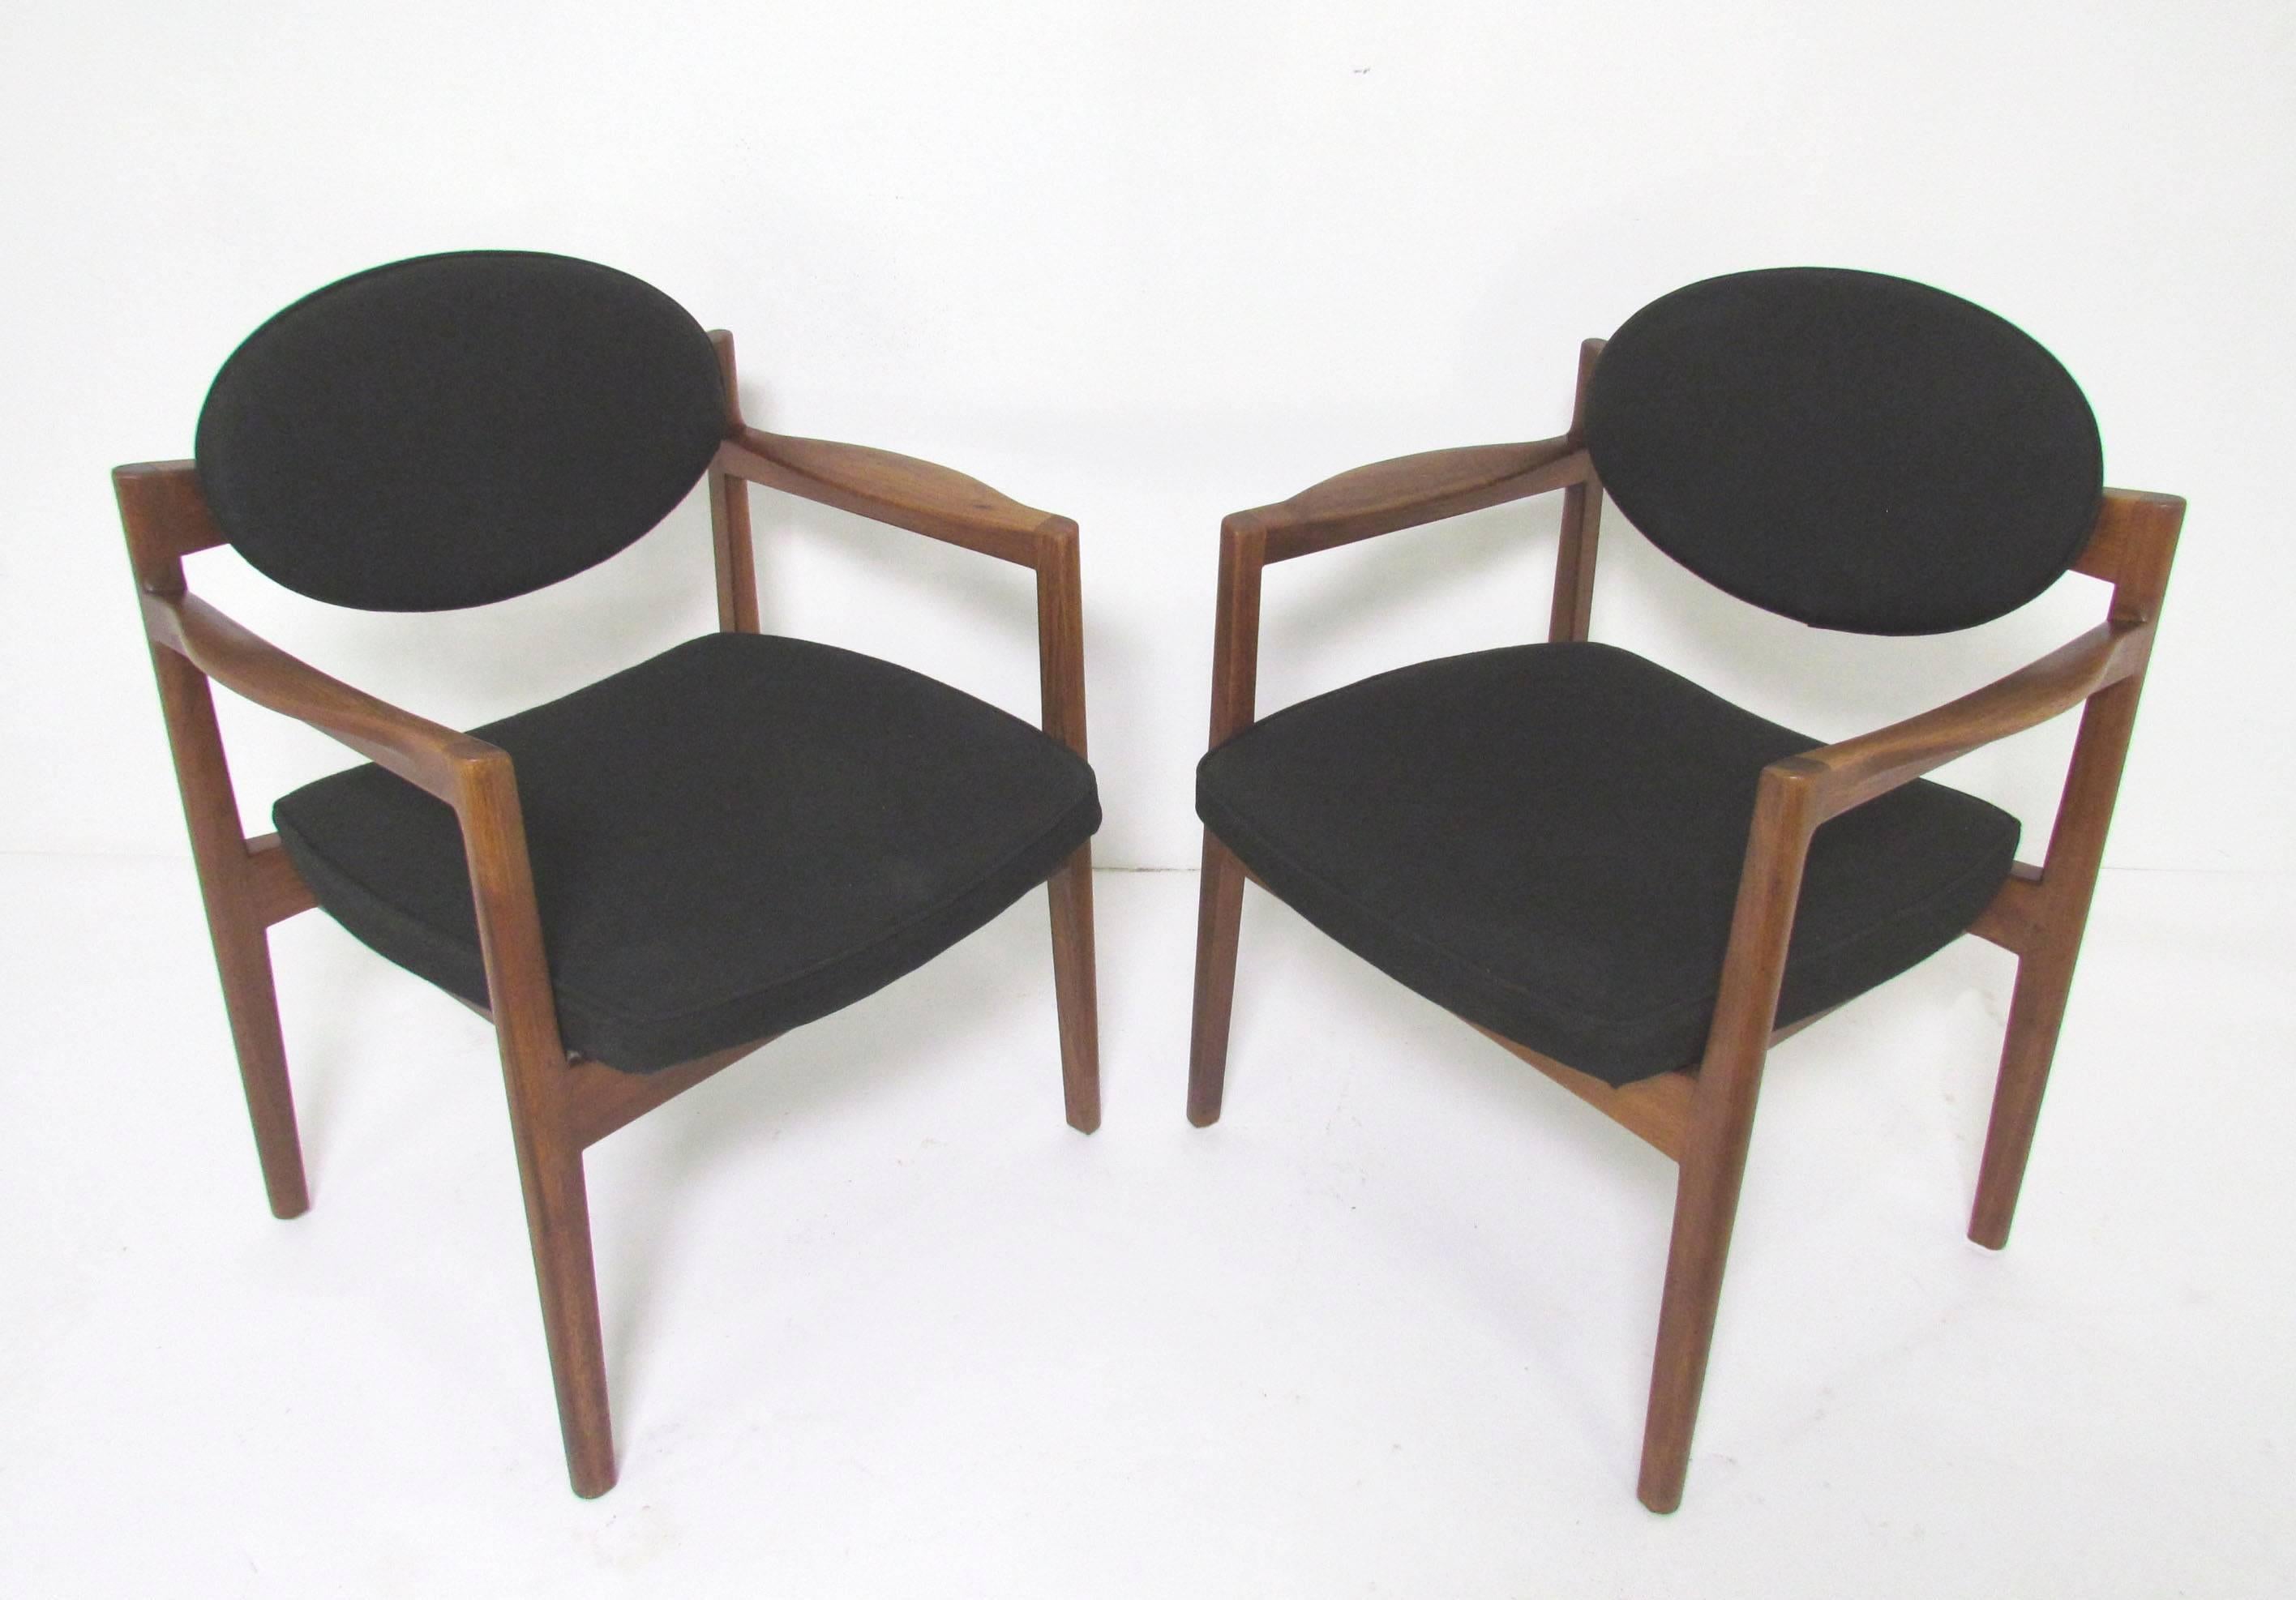 Pair of armchairs in solid walnut, circa 1960s. This model identified by the Danish Museum of Art and Design as a Jens Risom design. Given their size, they can be used as small-scale lounge chairs or as dining chairs, and were paired with a signed